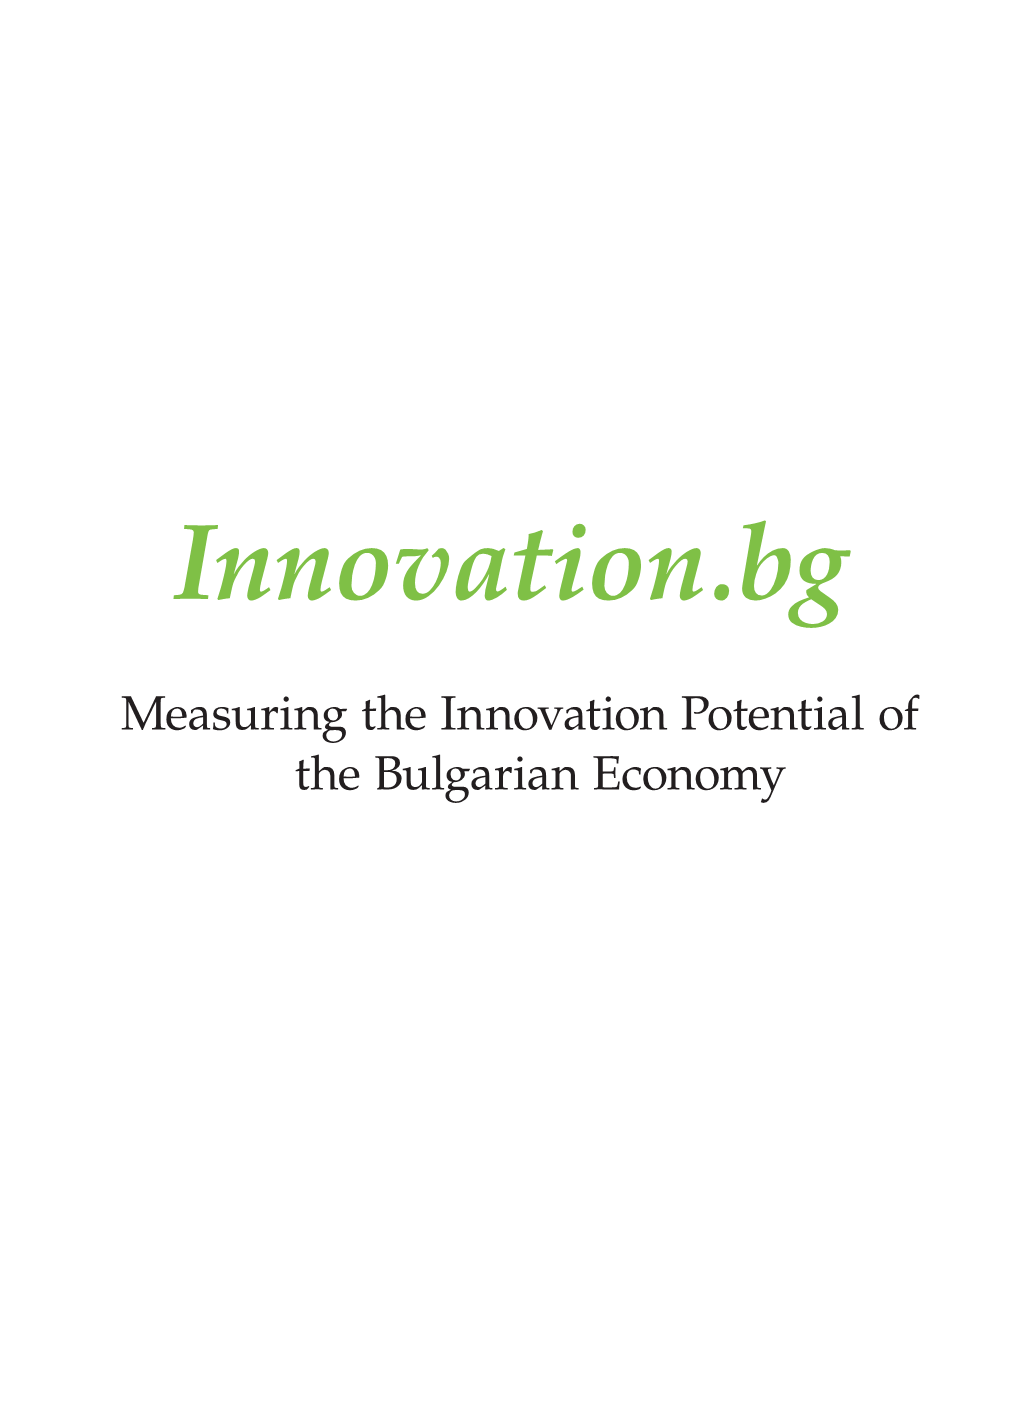 Innovation Investment and Financing